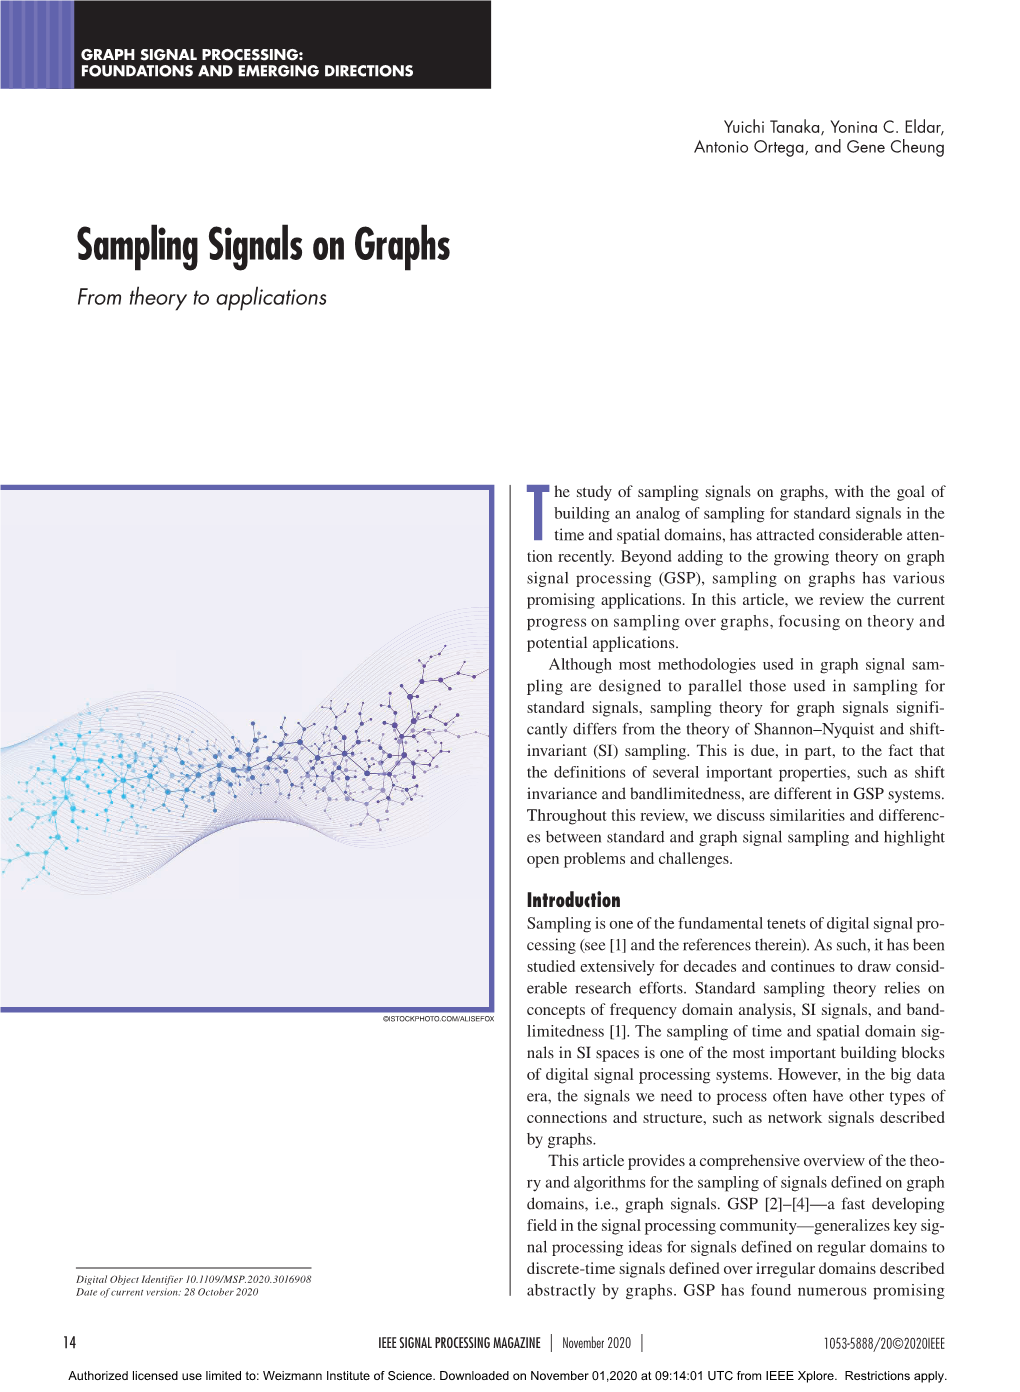 Sampling Signals on Graphs: from Theory to Applications